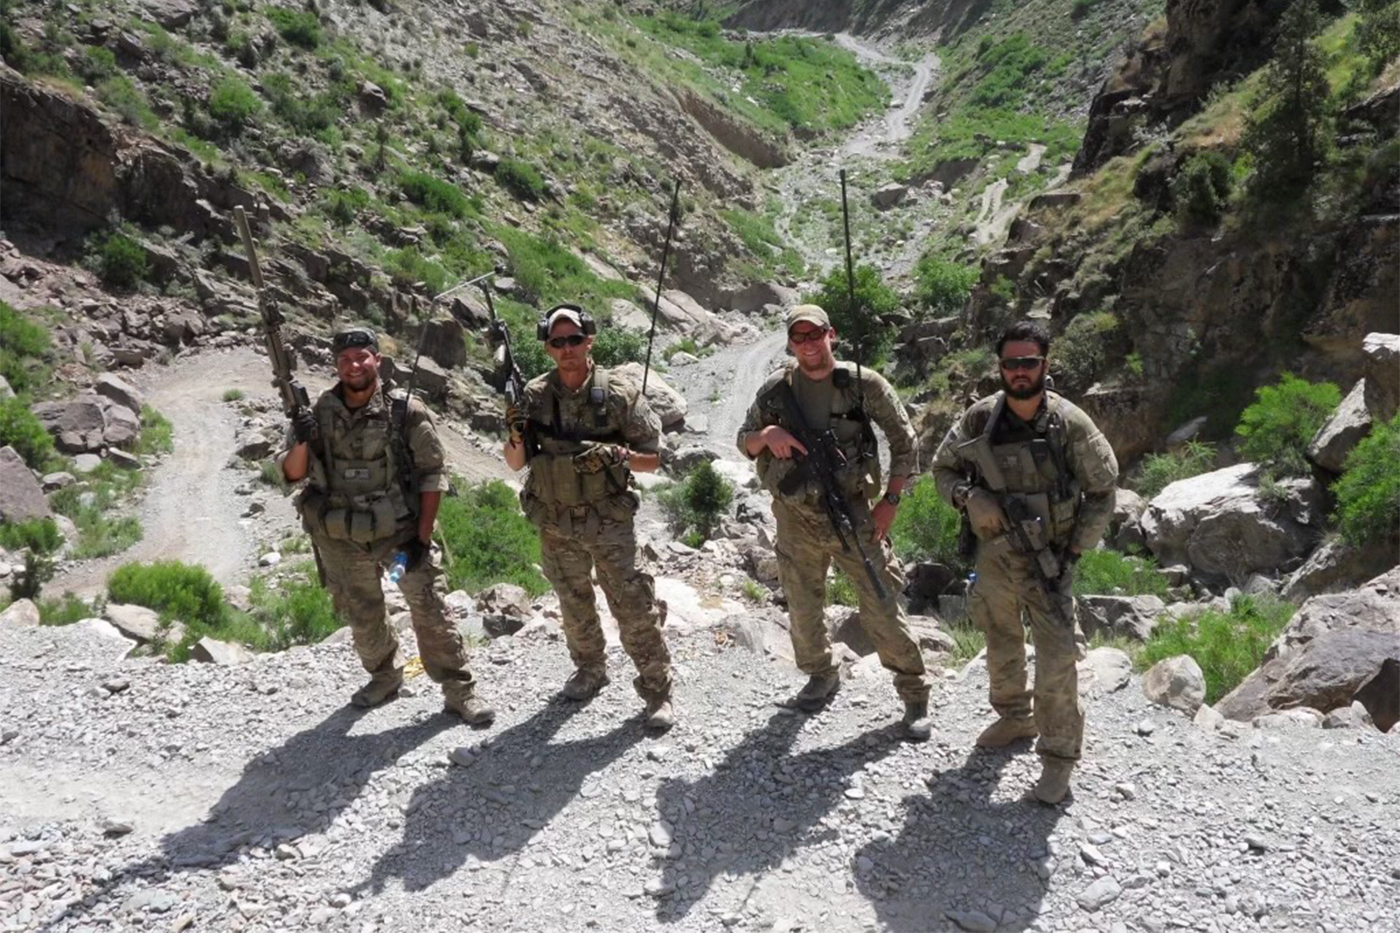 Dennis Hernandez and three other military members standing outside on the edge of a canyon.